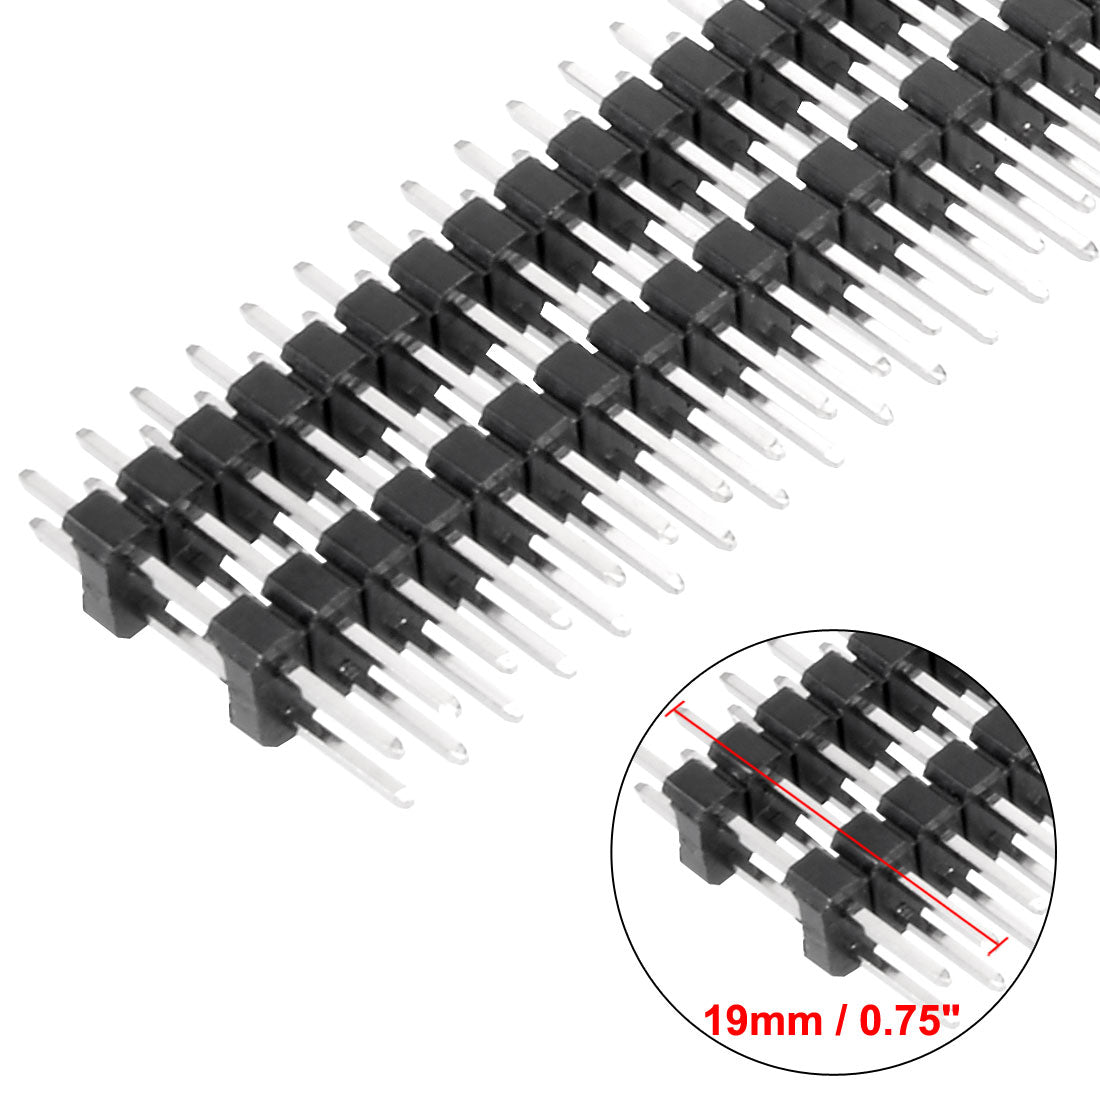 uxcell Uxcell 10Pcs 2.54mm Pitch 40-Pin 19mm Length 2 Row Straight Connector Pin Header Strip for Arduino Prototype Shield